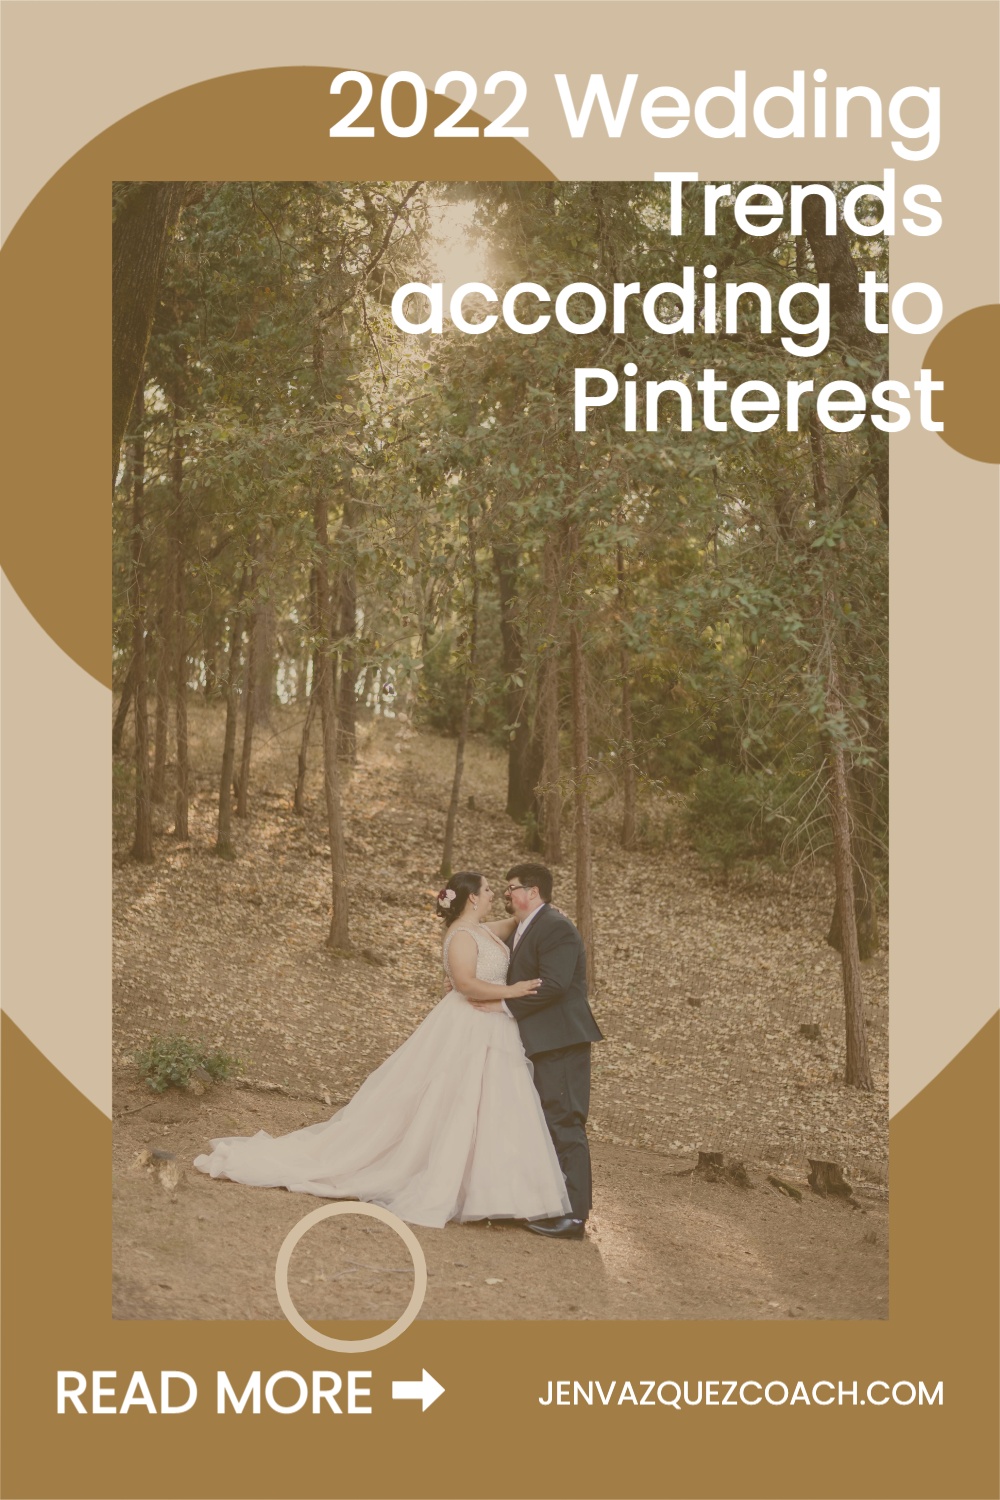 Wedding Trends for 2022 According to Pinterest